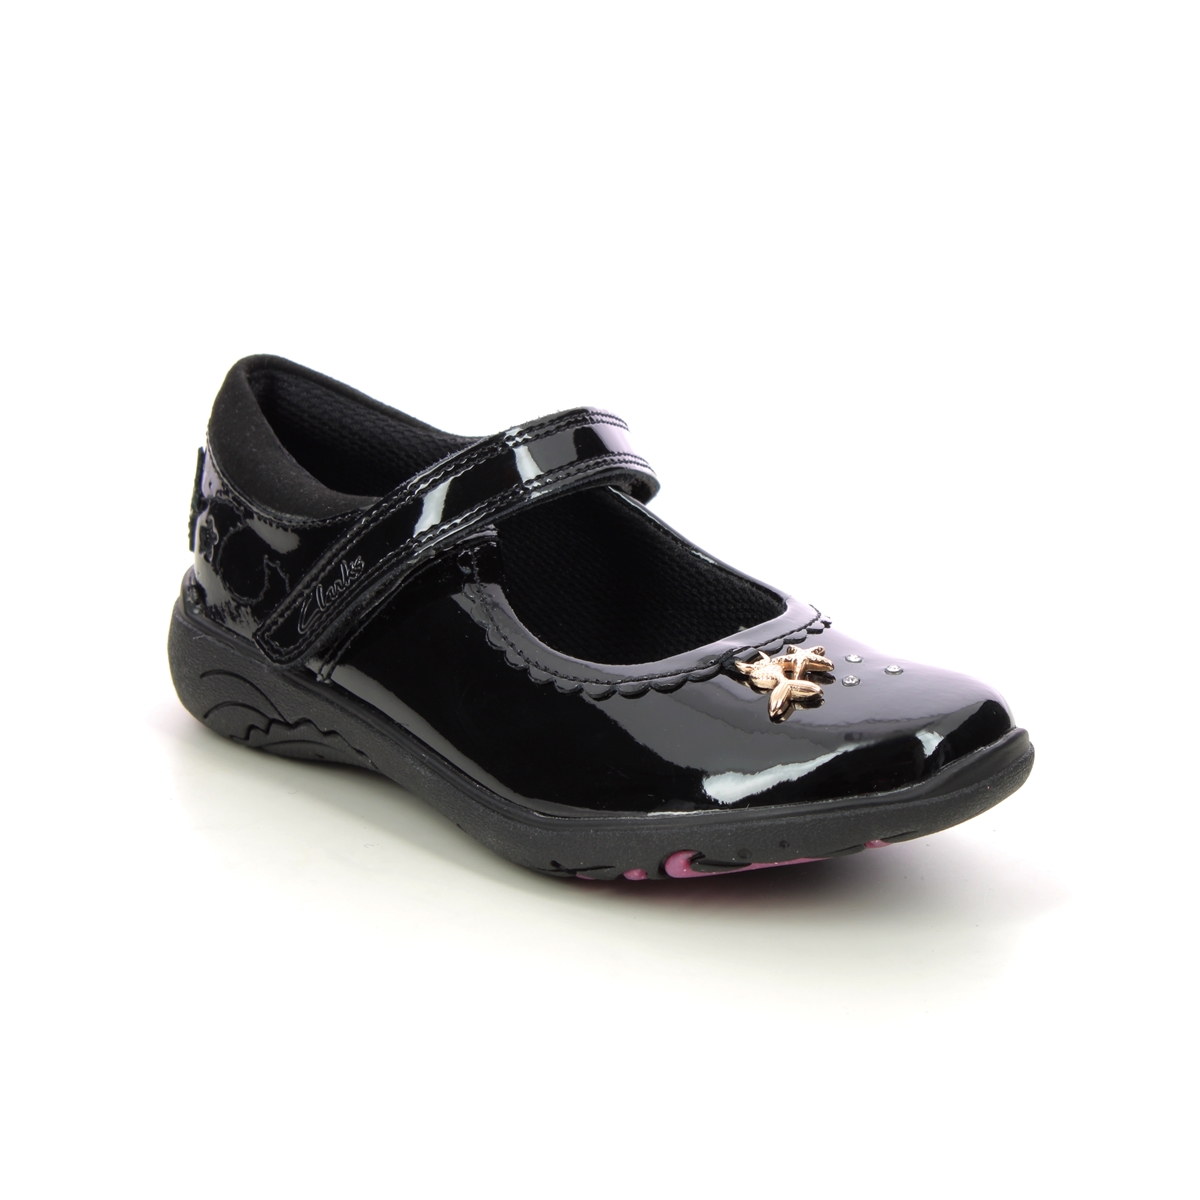 Clarks Relda Sea K Mary Jane Black Patent Kids Girls School Shoes 722415E In Size 8.5 In Plain Black Patent E Width Fitting Narrow Fit For School For